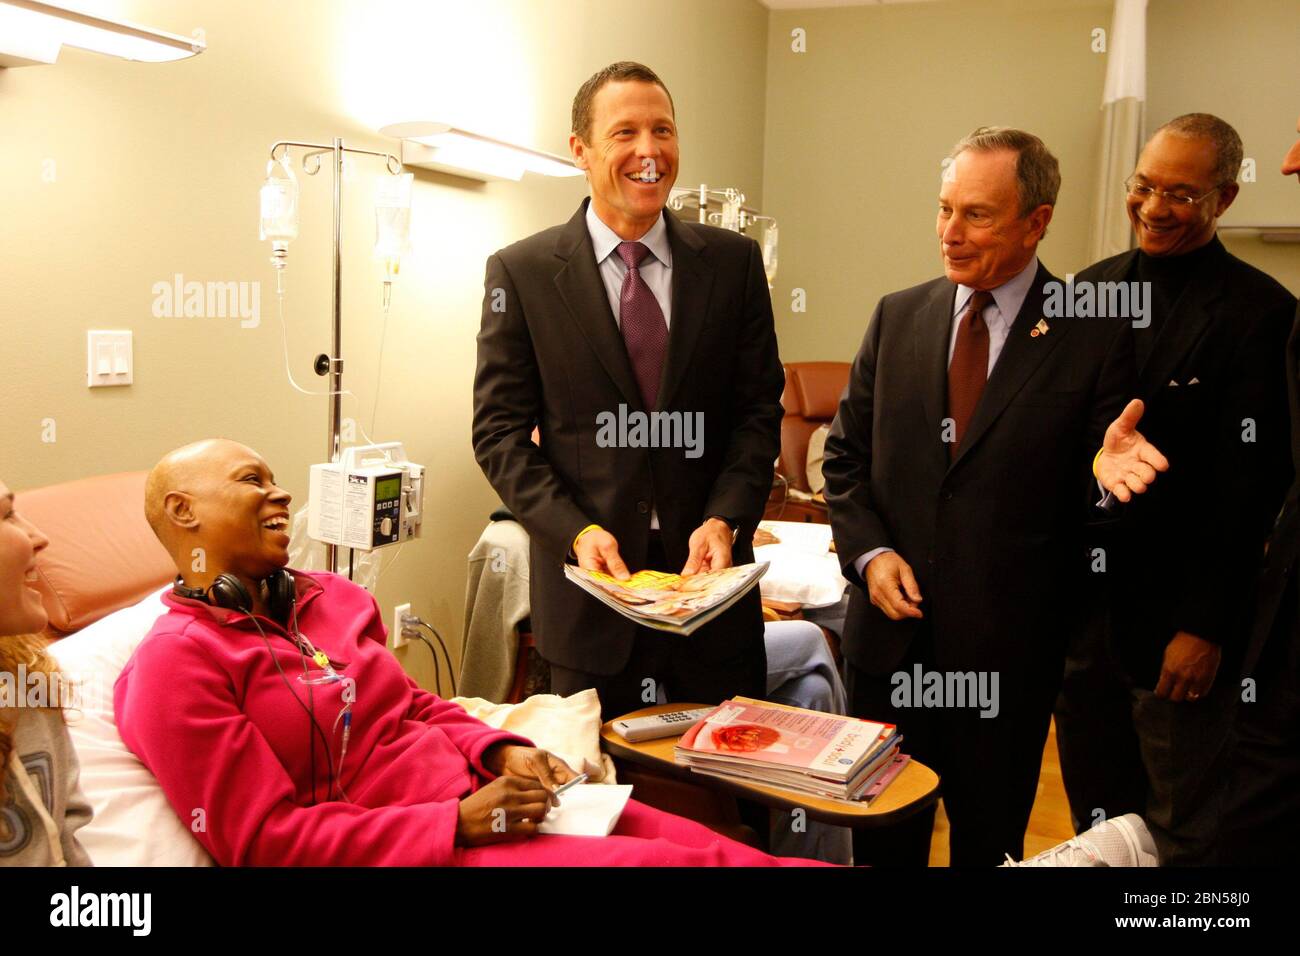 Austin, Texas USA, January 18, 2008: Five-time Tour de France winner and cancer survivor Lance Armstrong and New York City mayor Michael Bloomberg speak to reporters at a patient's bedside about a new cancer health initiative.  ©Bob Daemmrich Stock Photo